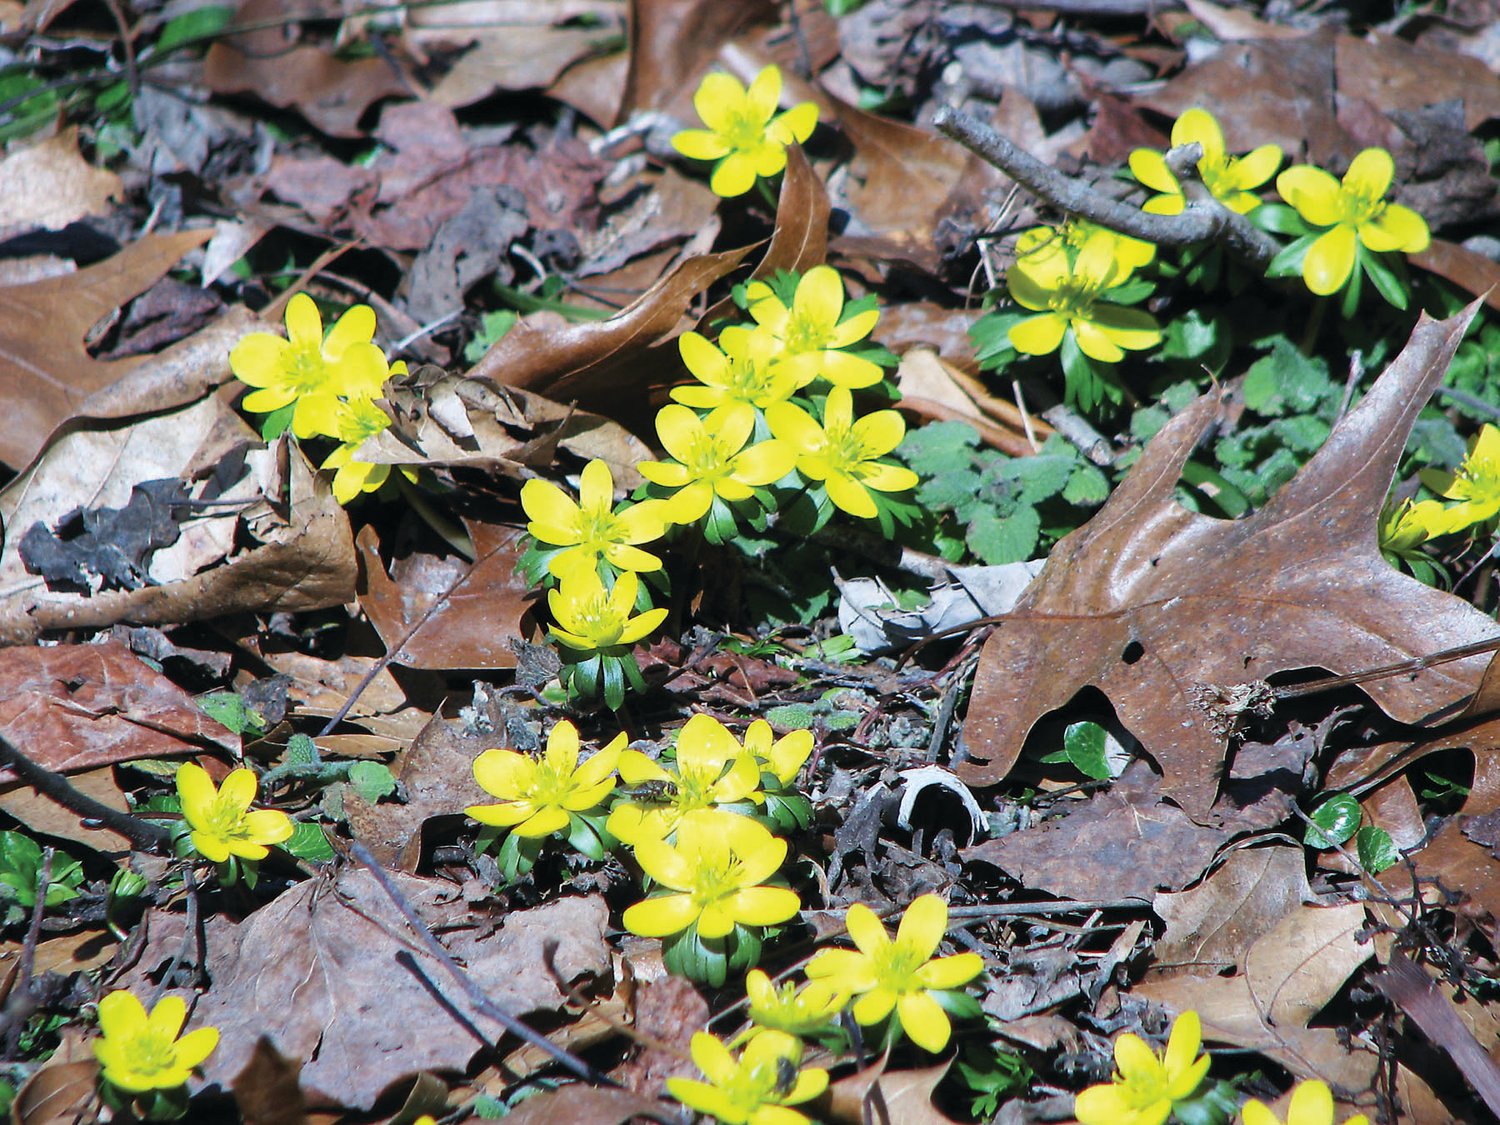 Early winter aconite is among the first flowers to surface.